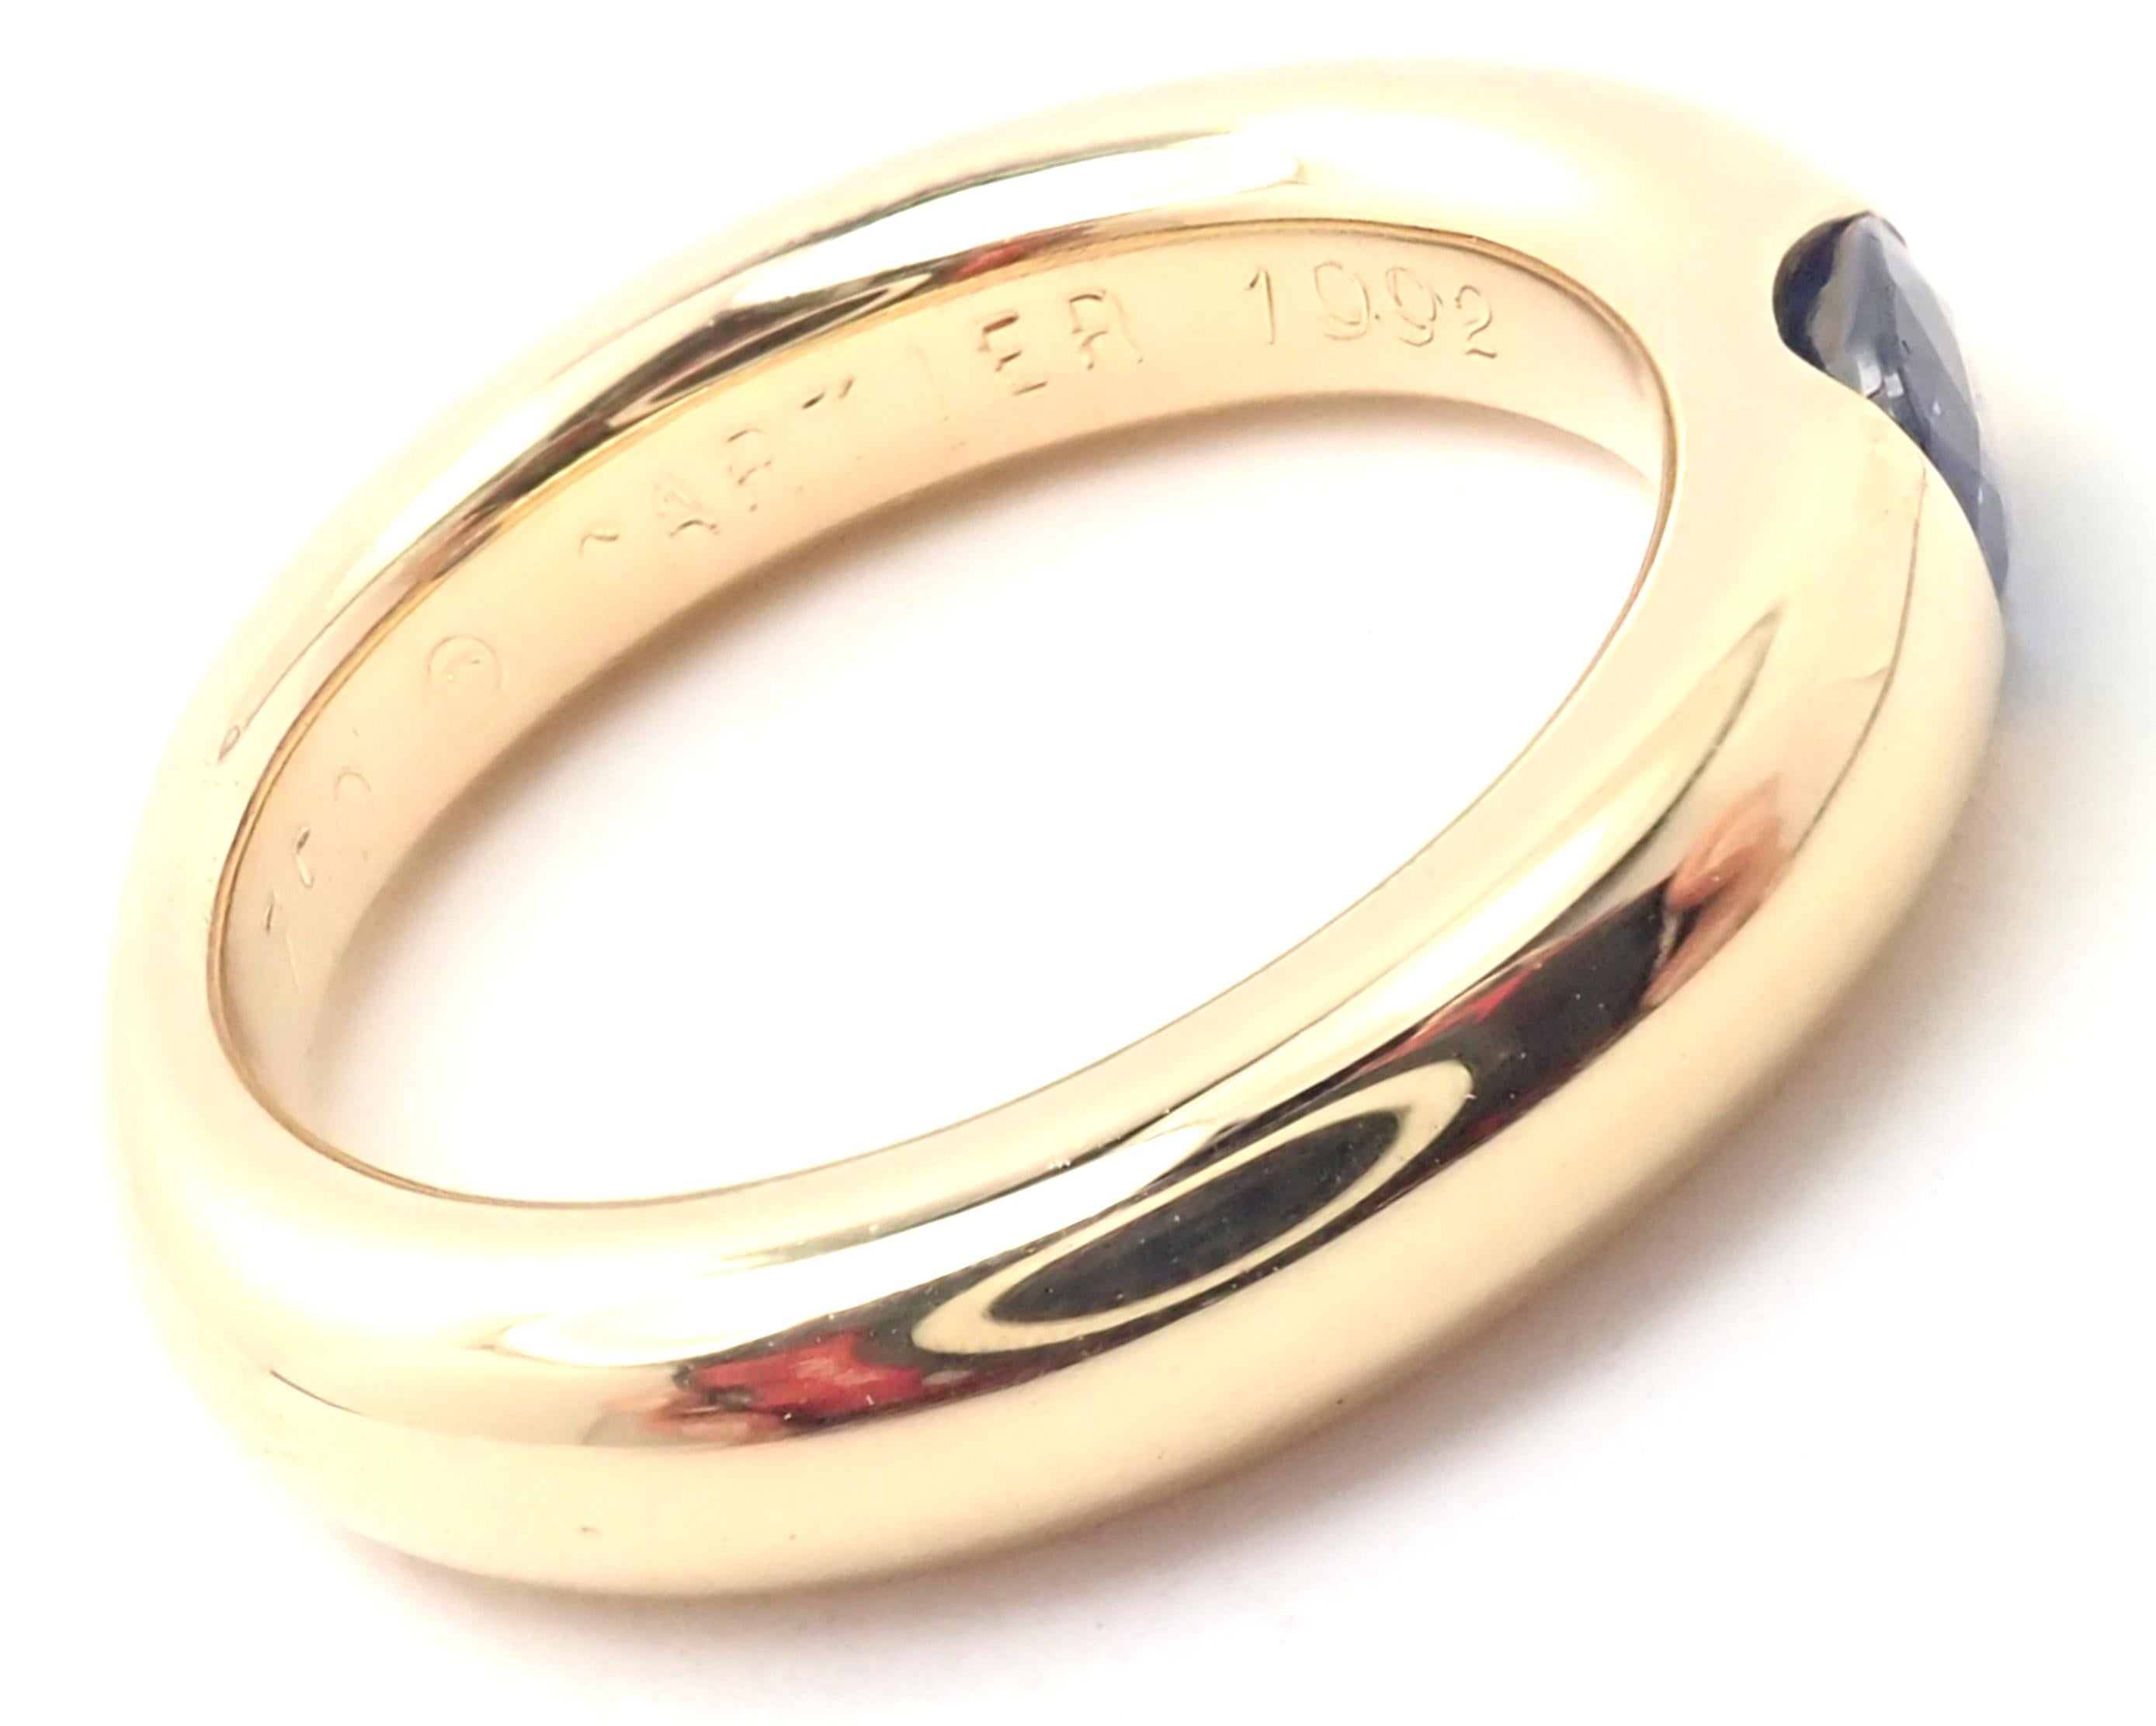 18k Yellow Gold Ellipse Sapphire Band Ring by Cartier.
With 1 oval-shaped beautiful sapphire 5mm x 4mm.
Details:
Width: 4mm
Weight: 9.1 grams
Ring Size: European 51, US 5 3/4
Stamped Hallmarks: Cartier 750 51 1992 96XXX(serial number omitted)
*Free